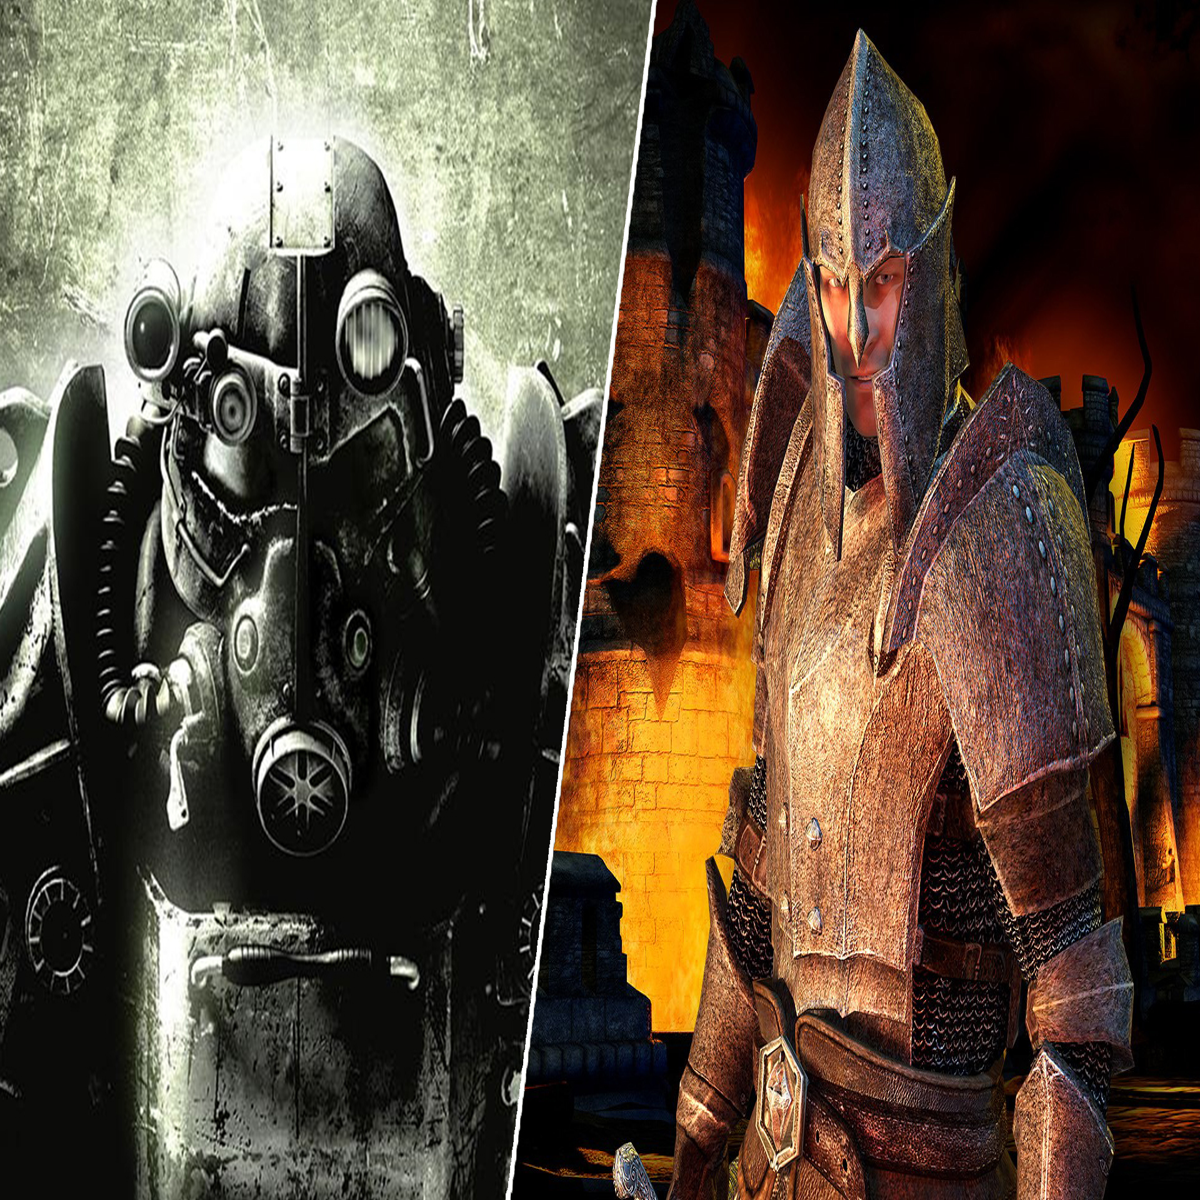 Oblivion Remaster, Fallout 3 Remaster, and More Leaked From Microsoft  Document